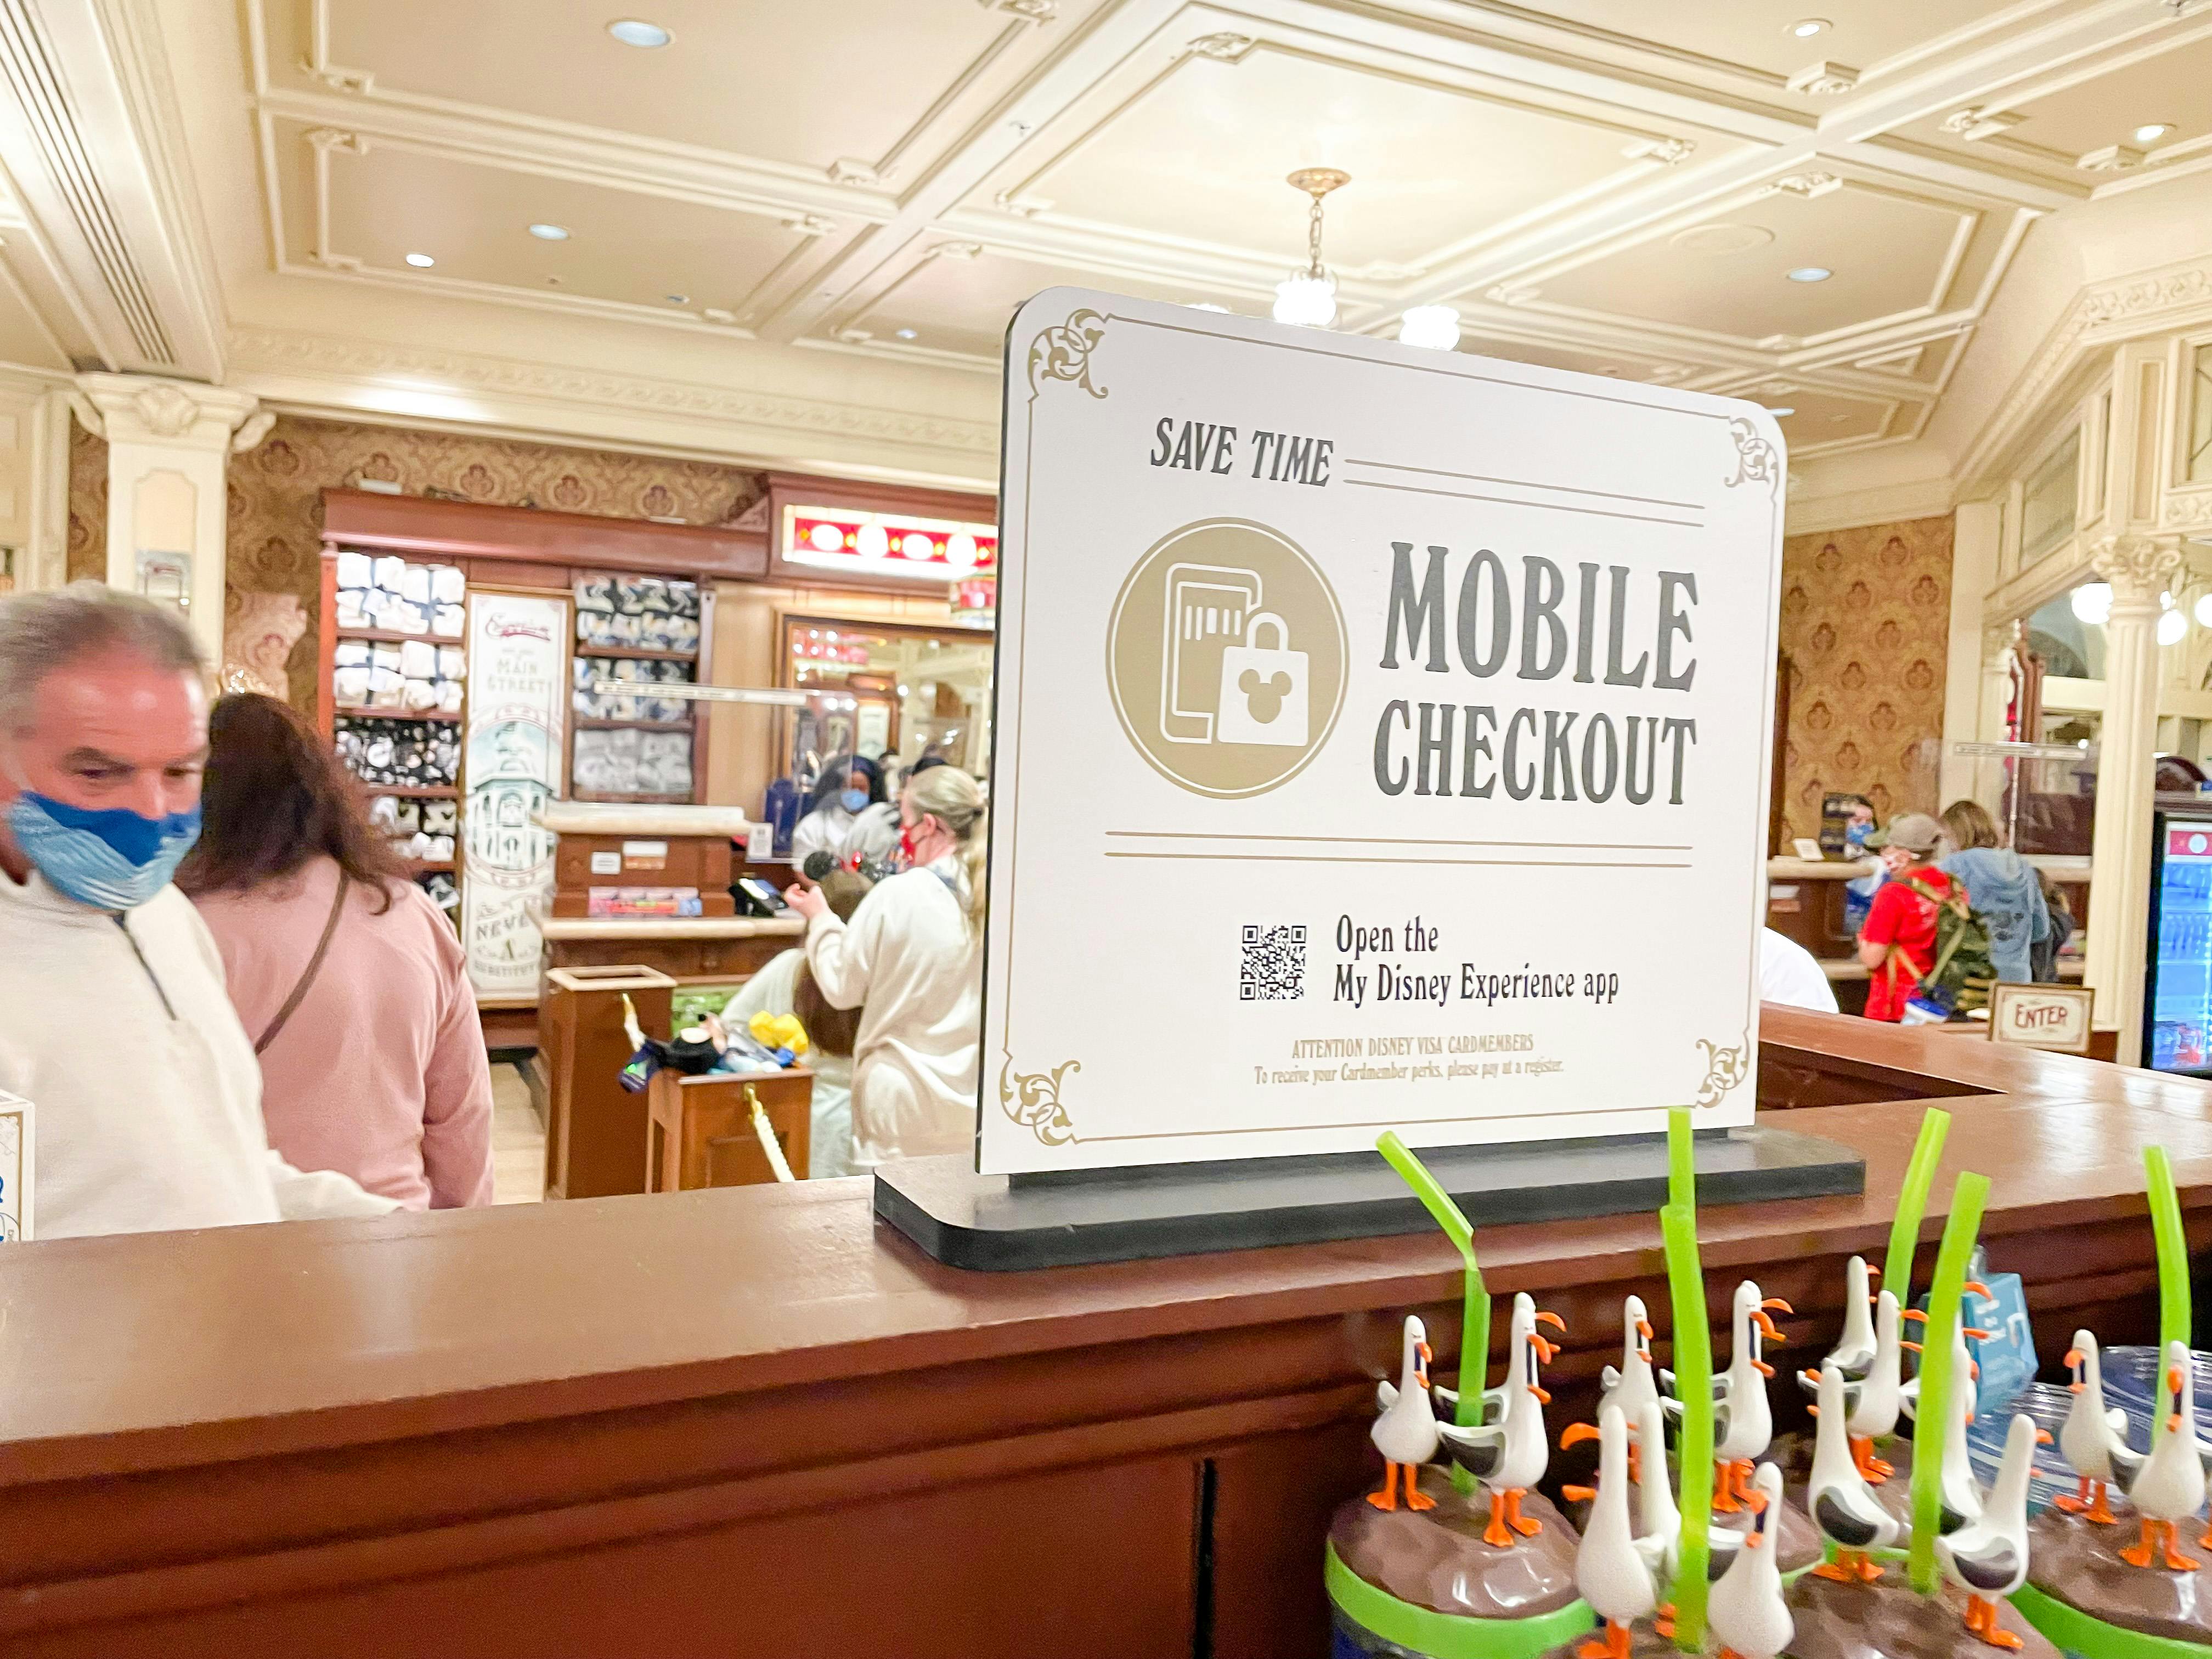 A sign advertising Mobile Checkout inside a gift shop at Disney.